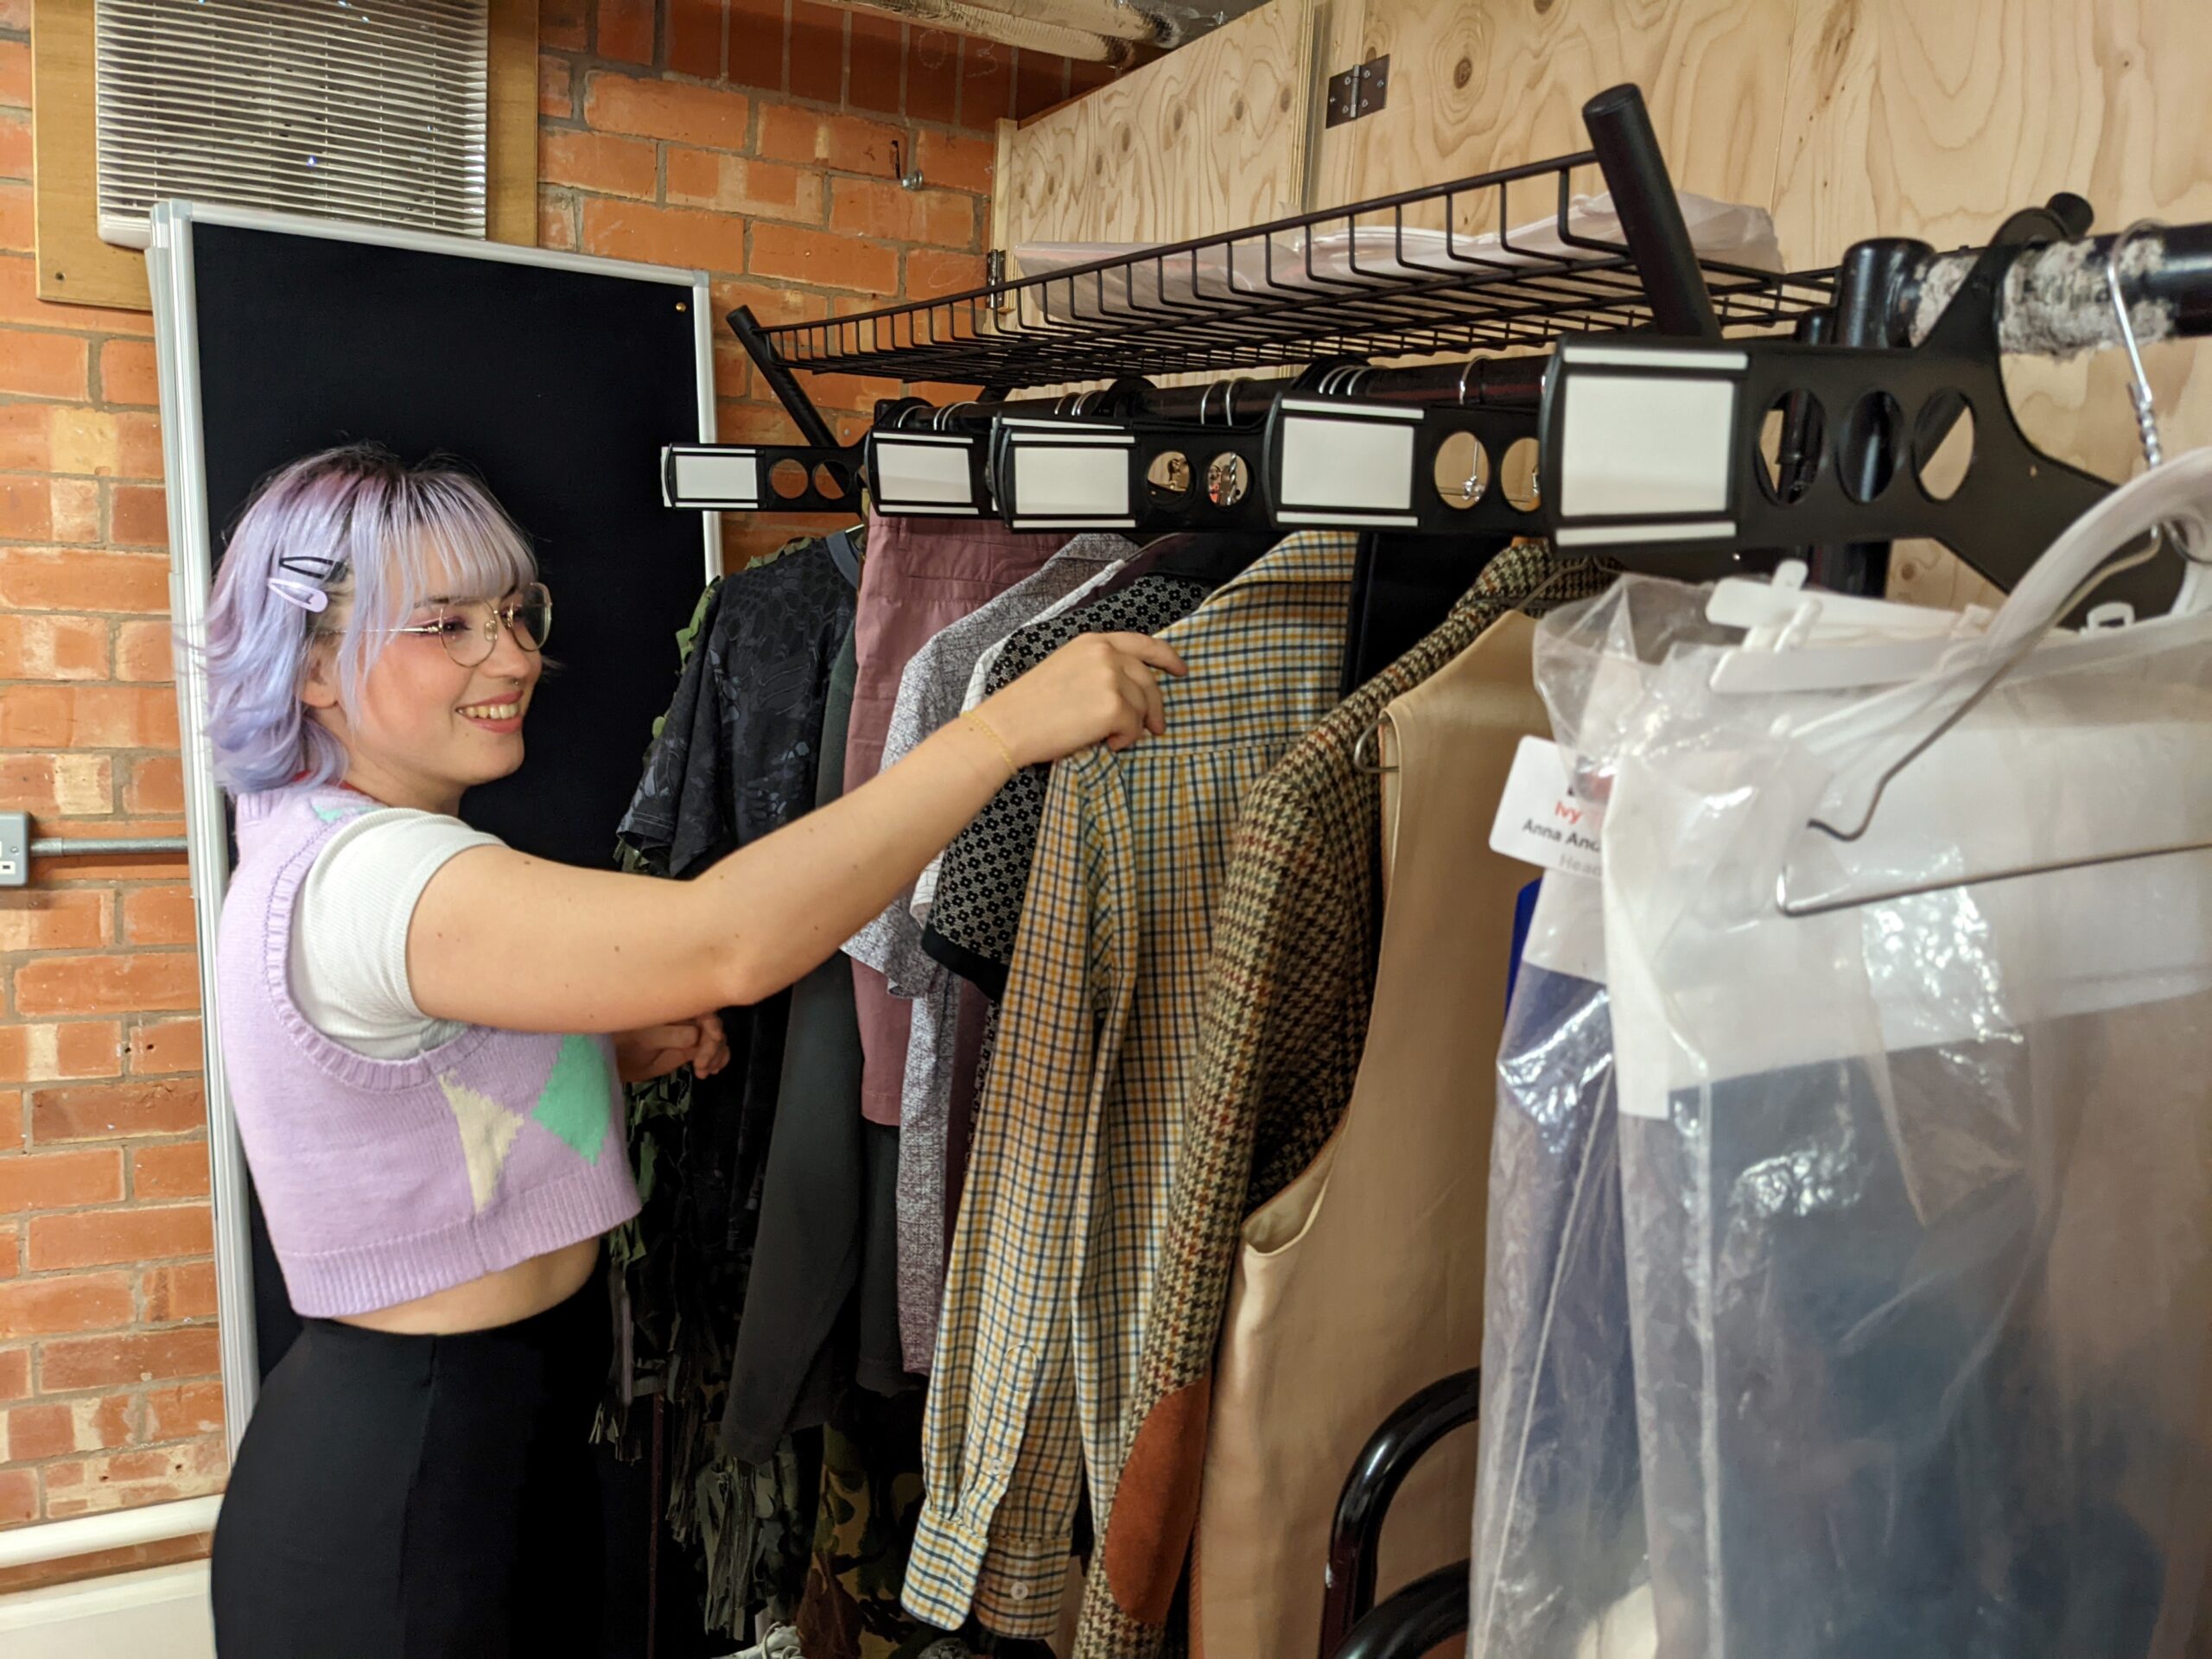 Former College Student Takes Next Steps as Costume Maker